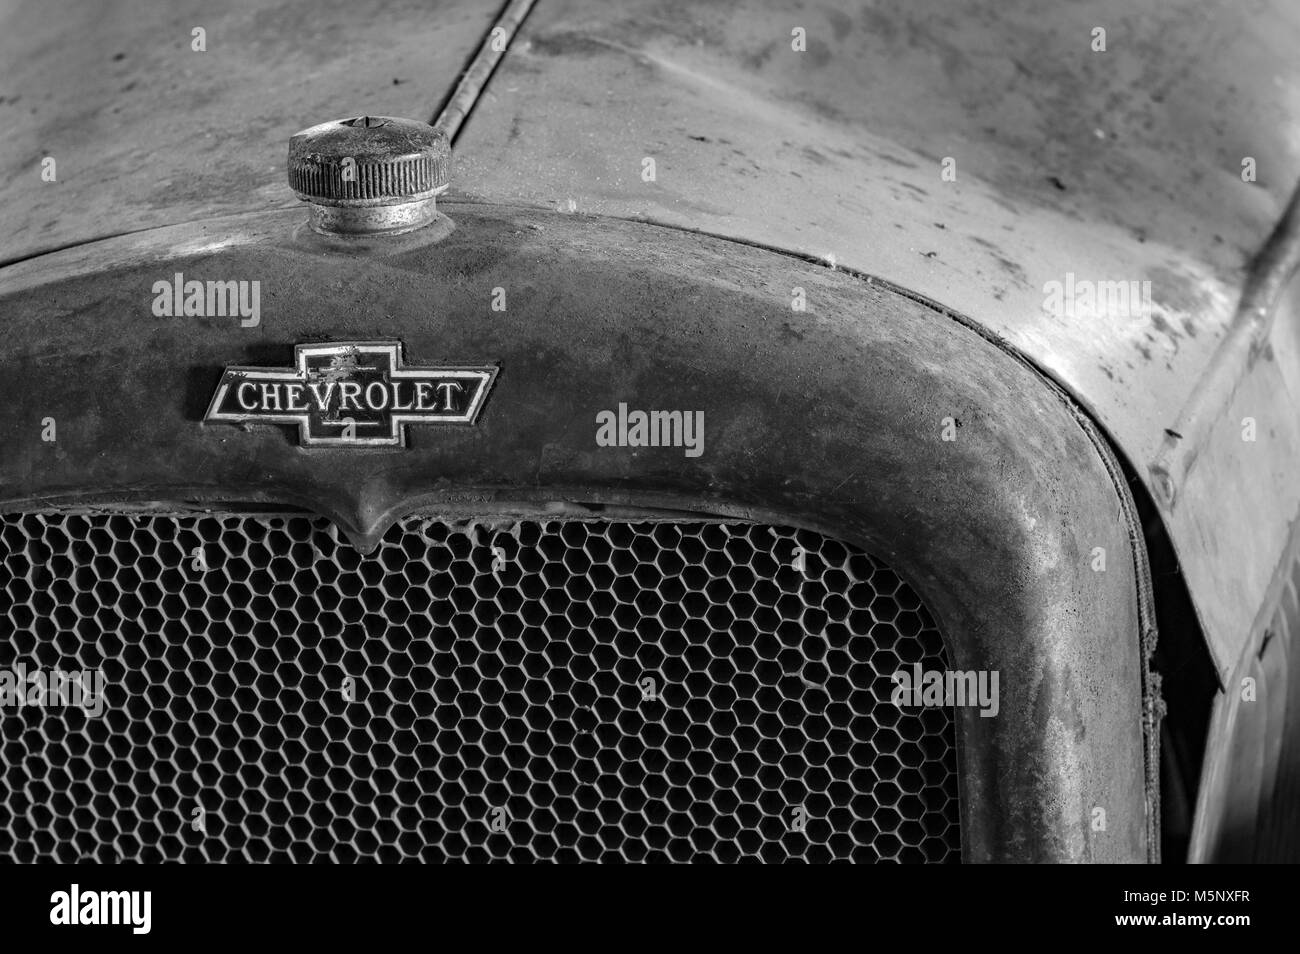 Radiator and hood of a vintage Chevrolet automobile Stock Photo